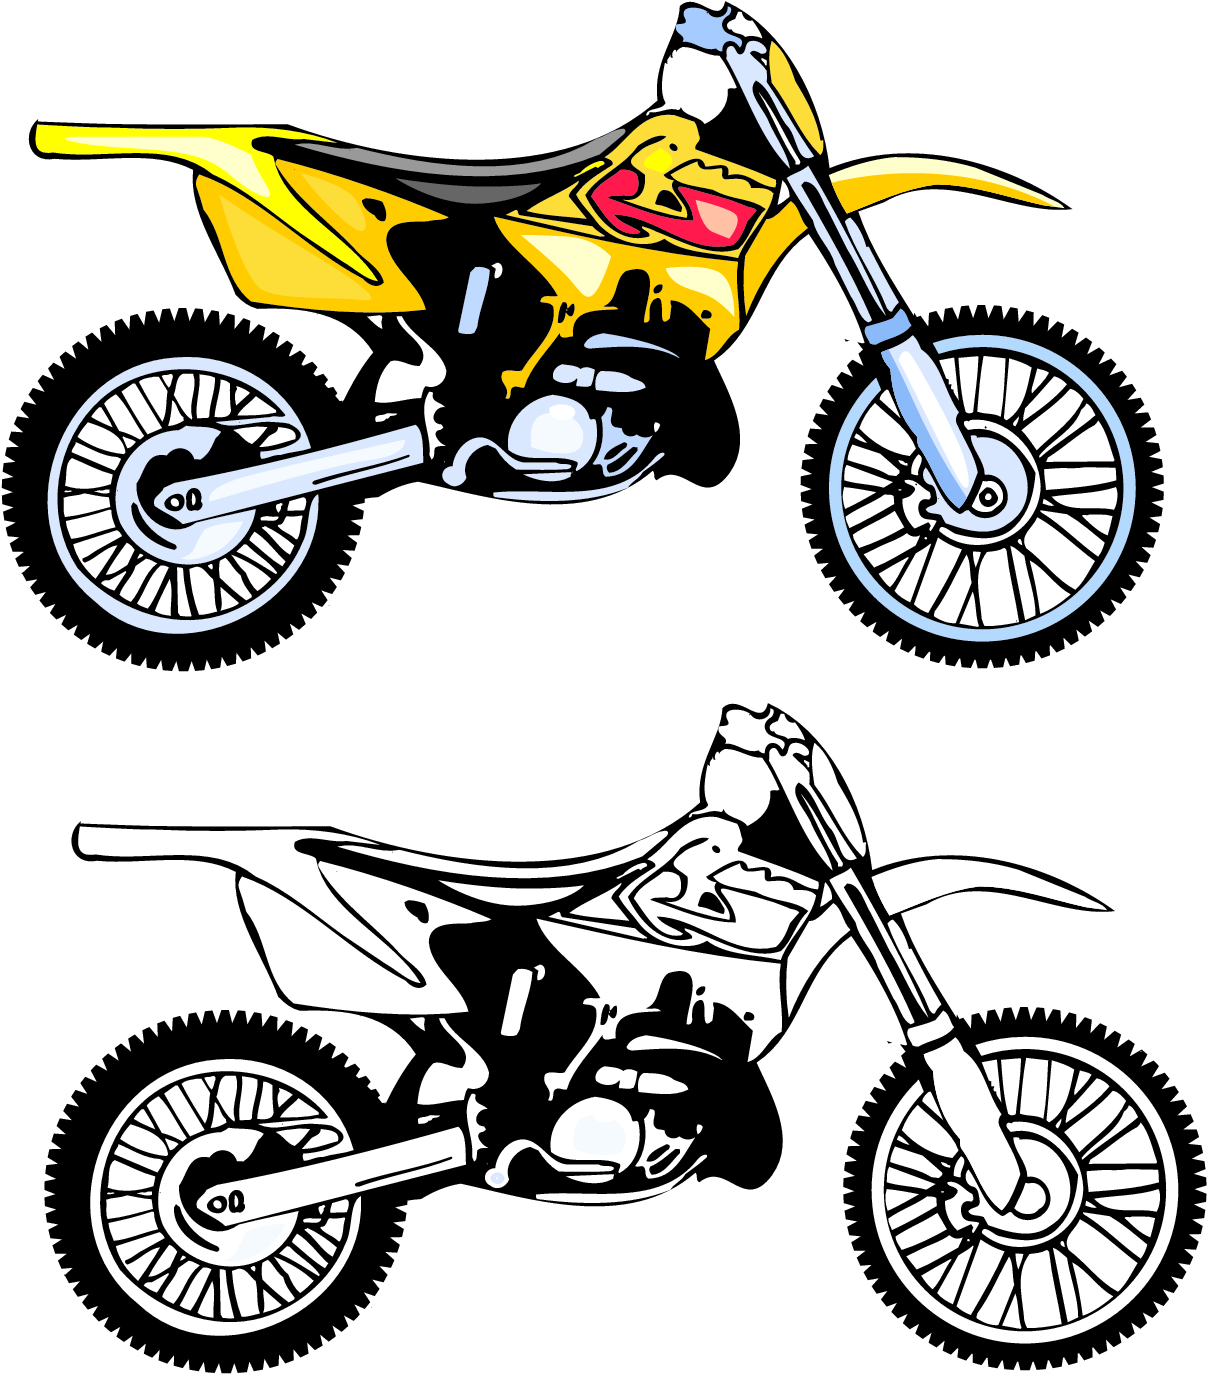 free animated motorcycle clipart - photo #44